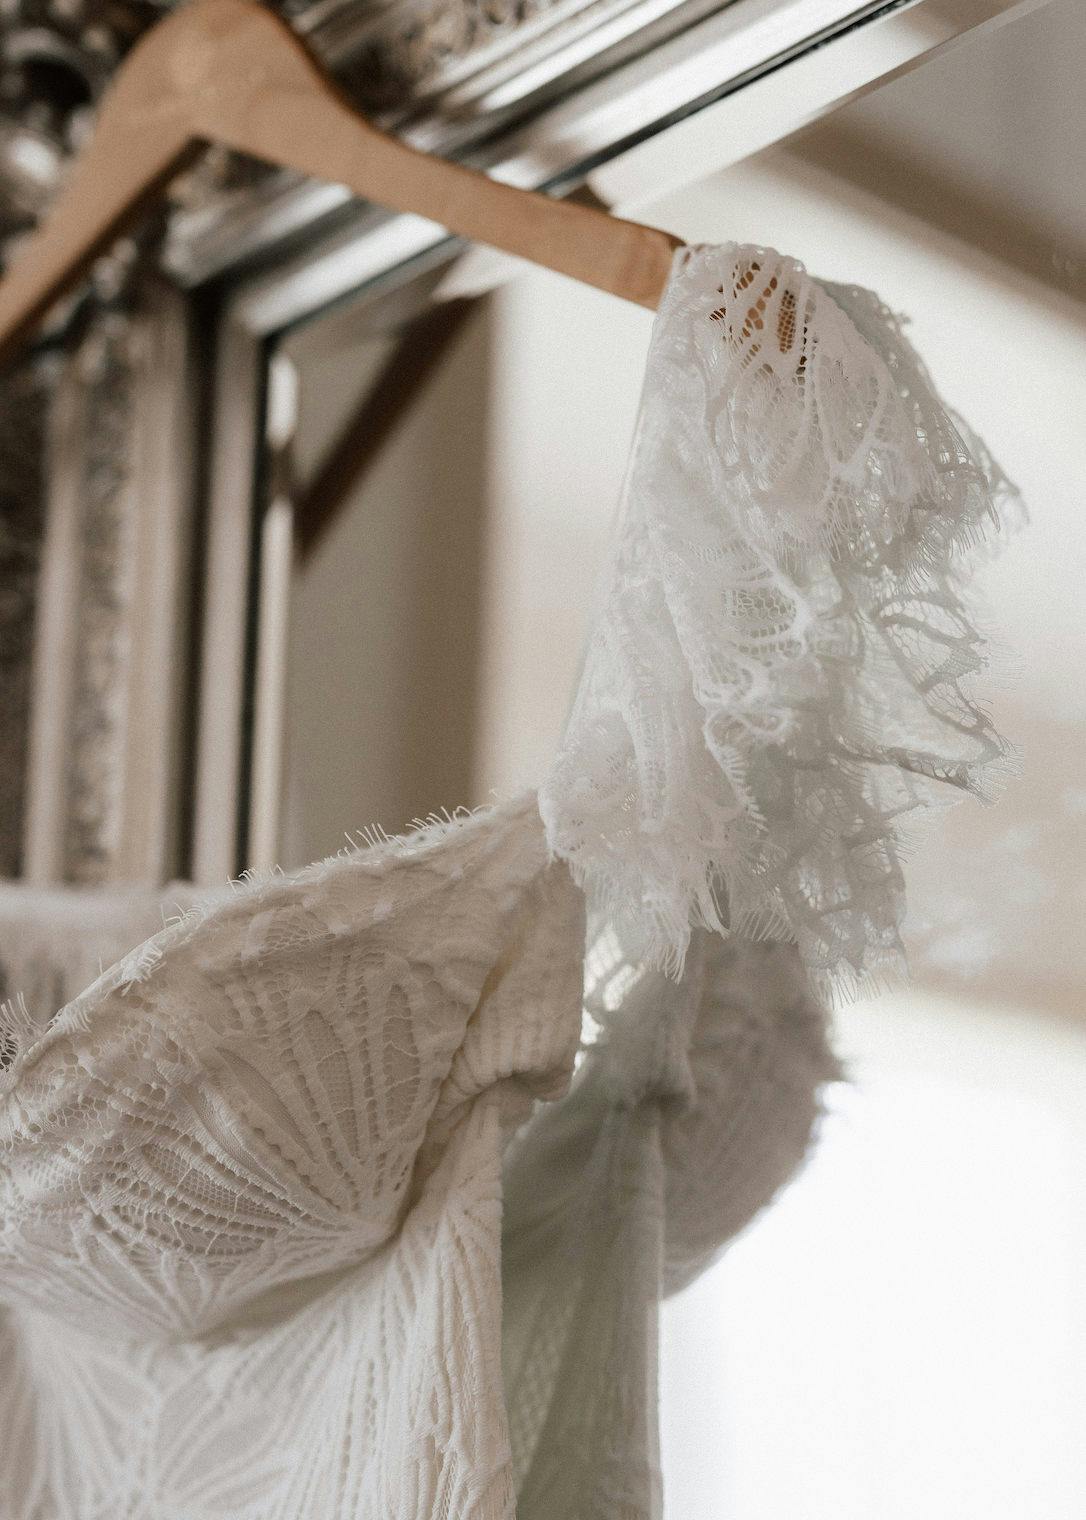 Close-up of a white lace wedding dress hanging on a wooden hanger in front of a mirror. The intricate lace detail and delicate fabric are emphasized, showcasing the craftsmanship of the garment. The soft lighting adds a romantic ambiance to the scene.